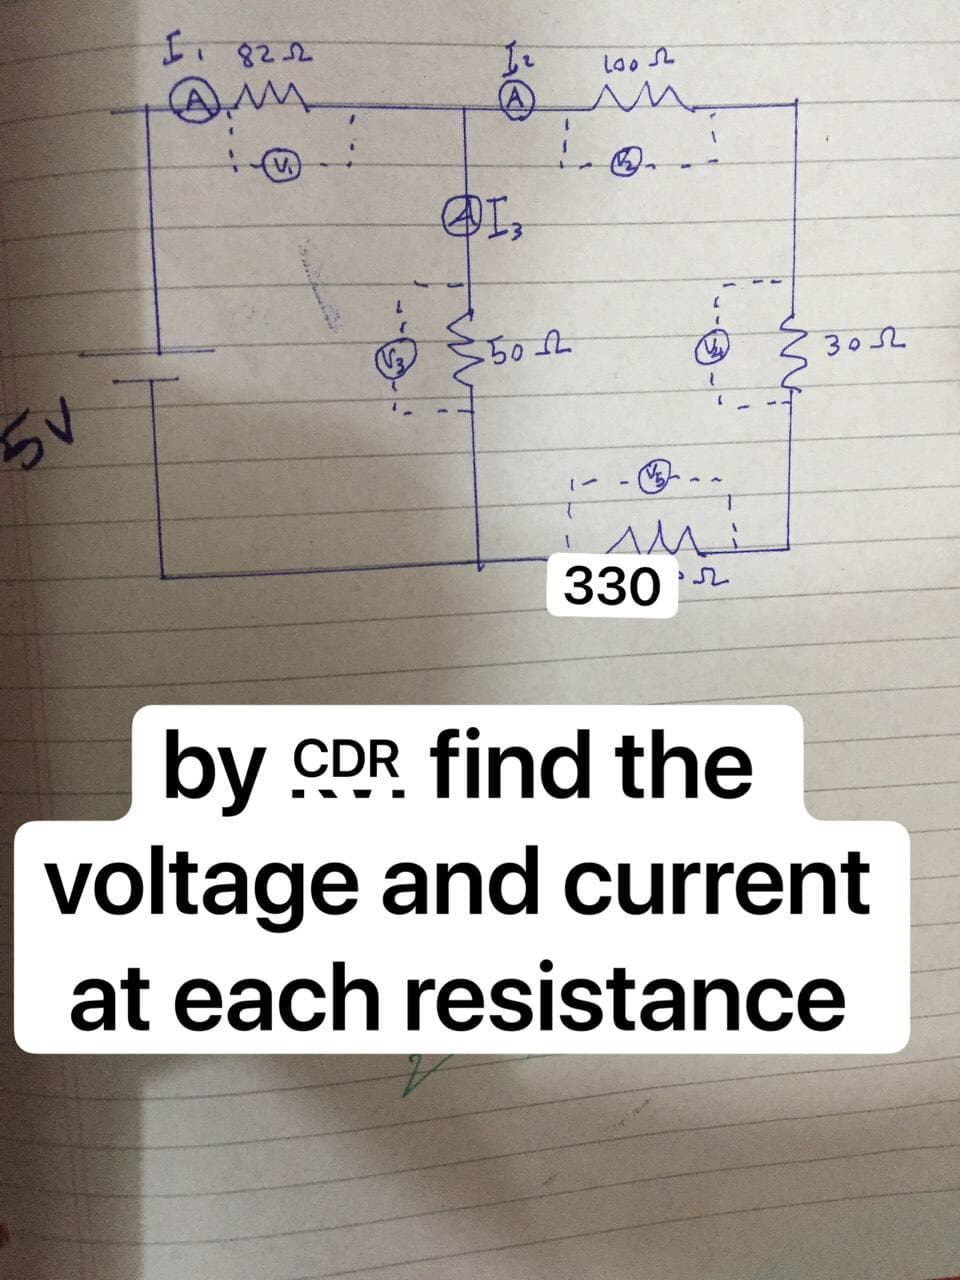 30L
330 r
by CDR find the
voltage and current
at each resistance
